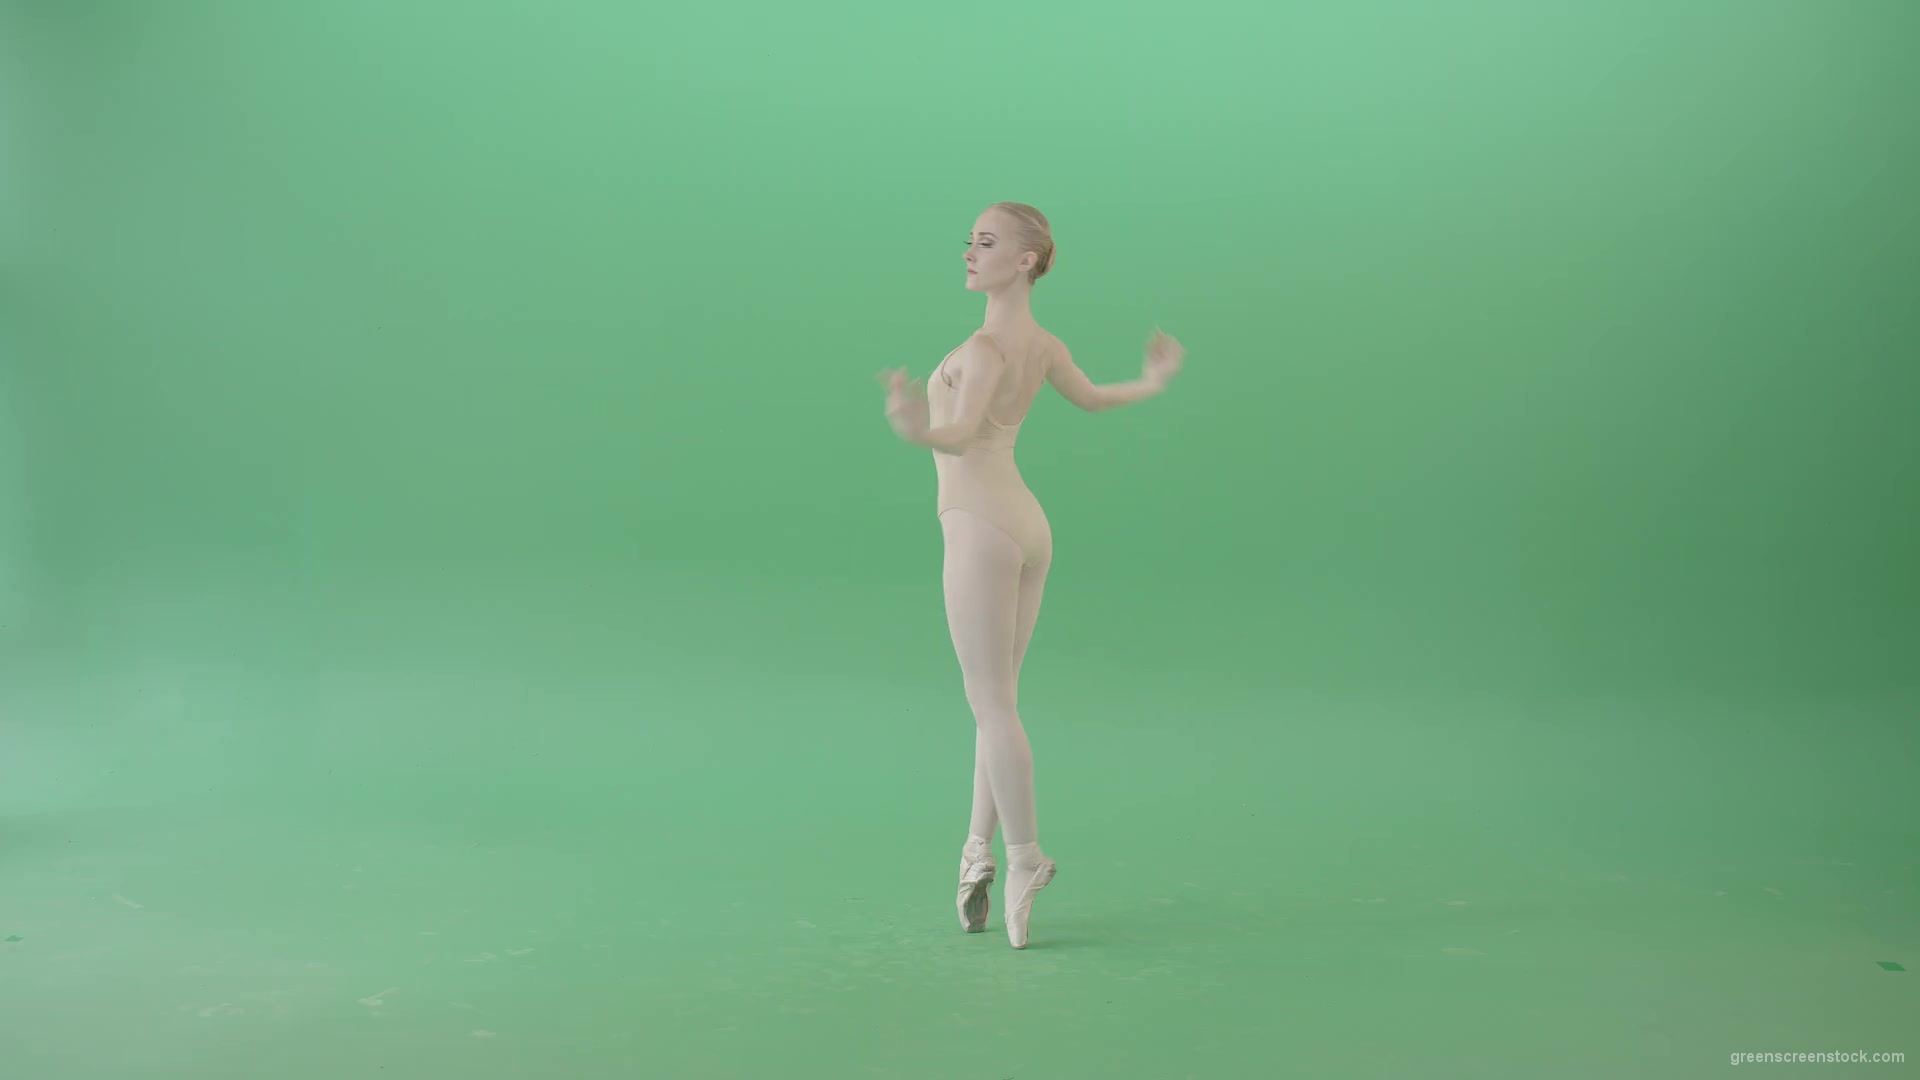 Ballet-dancer-woman-spinning-in-body-color-outfit-isolated-on-green-screen-4K-Video-Footage-1920_006 Green Screen Stock